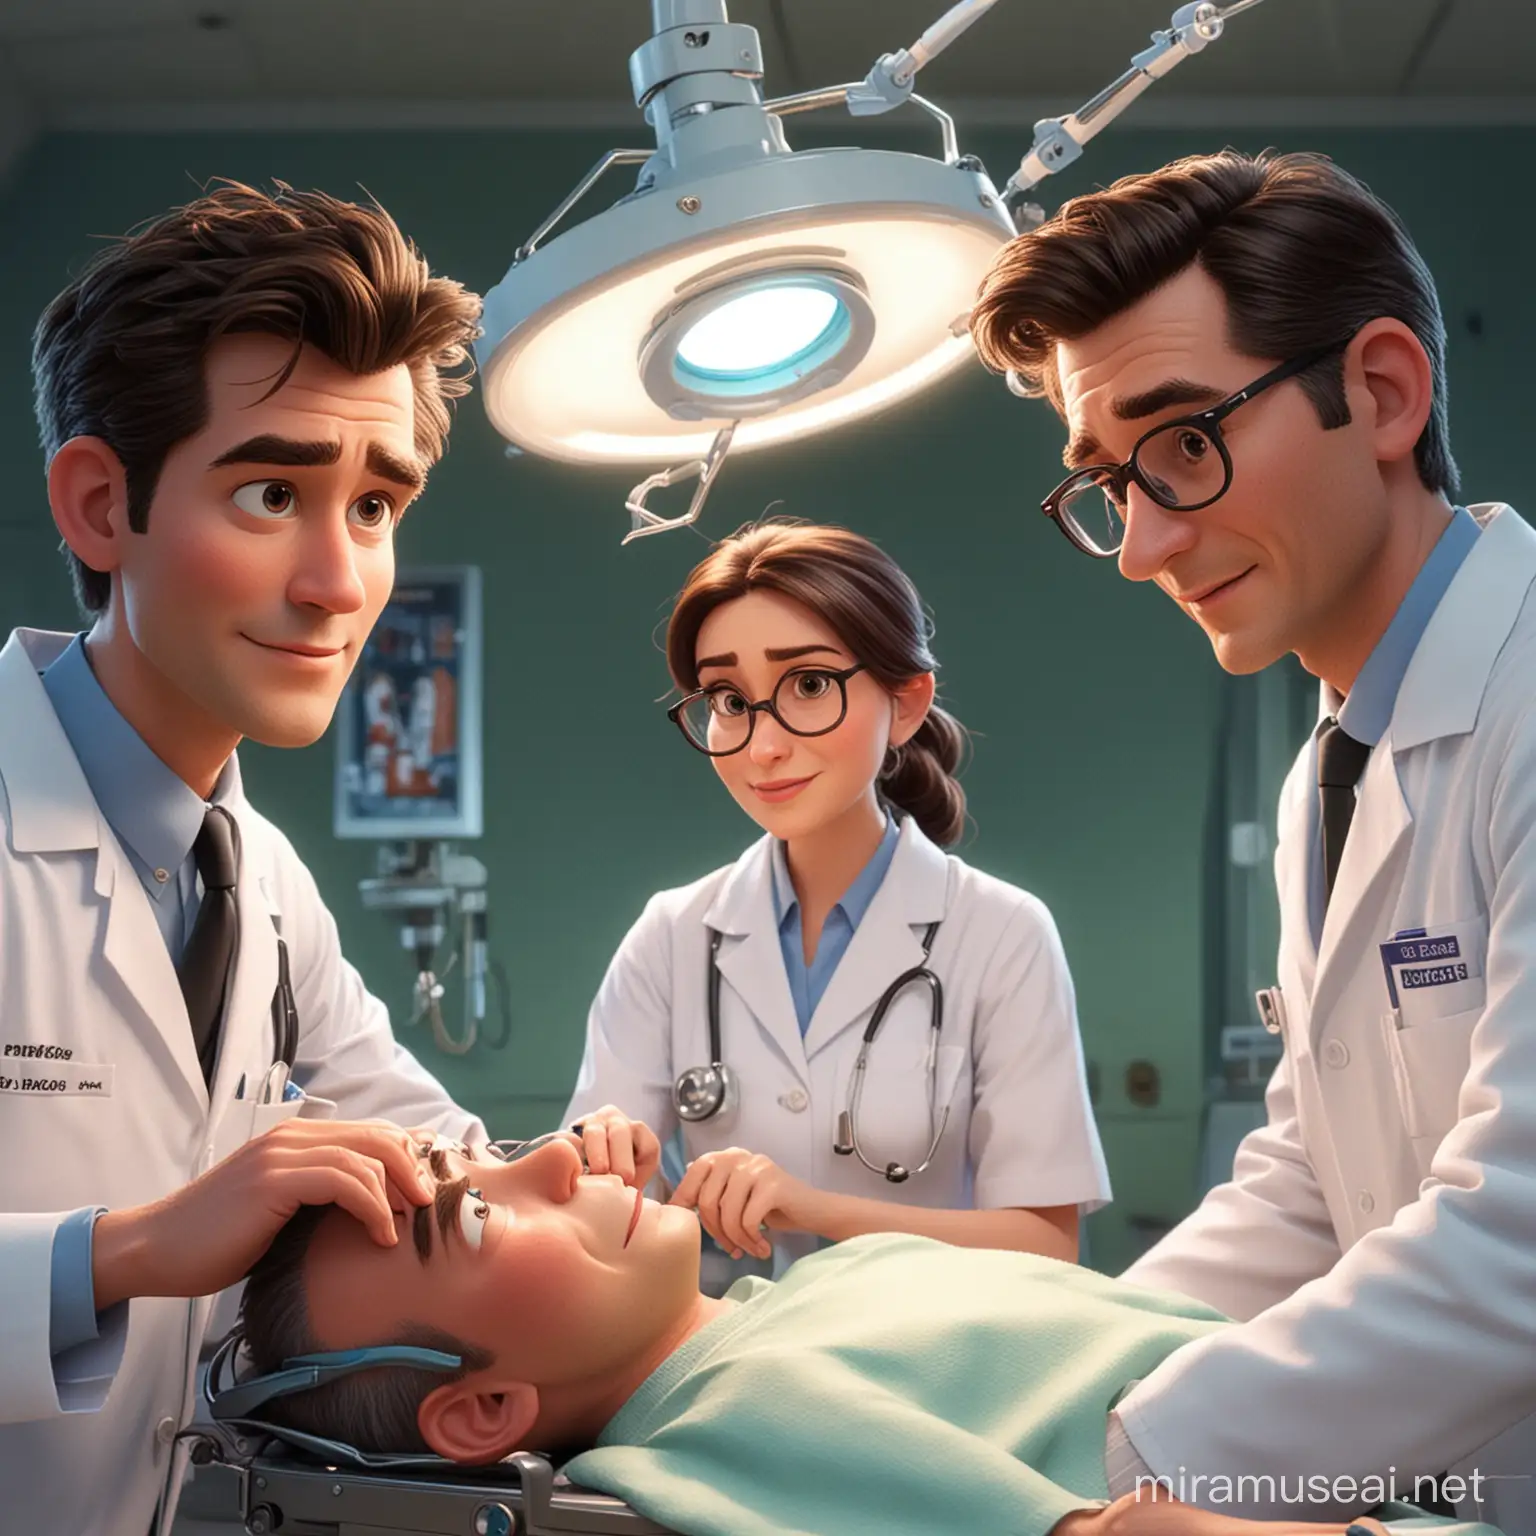 a doctor and another doctor are making an operation on a patient ,disney pixar style